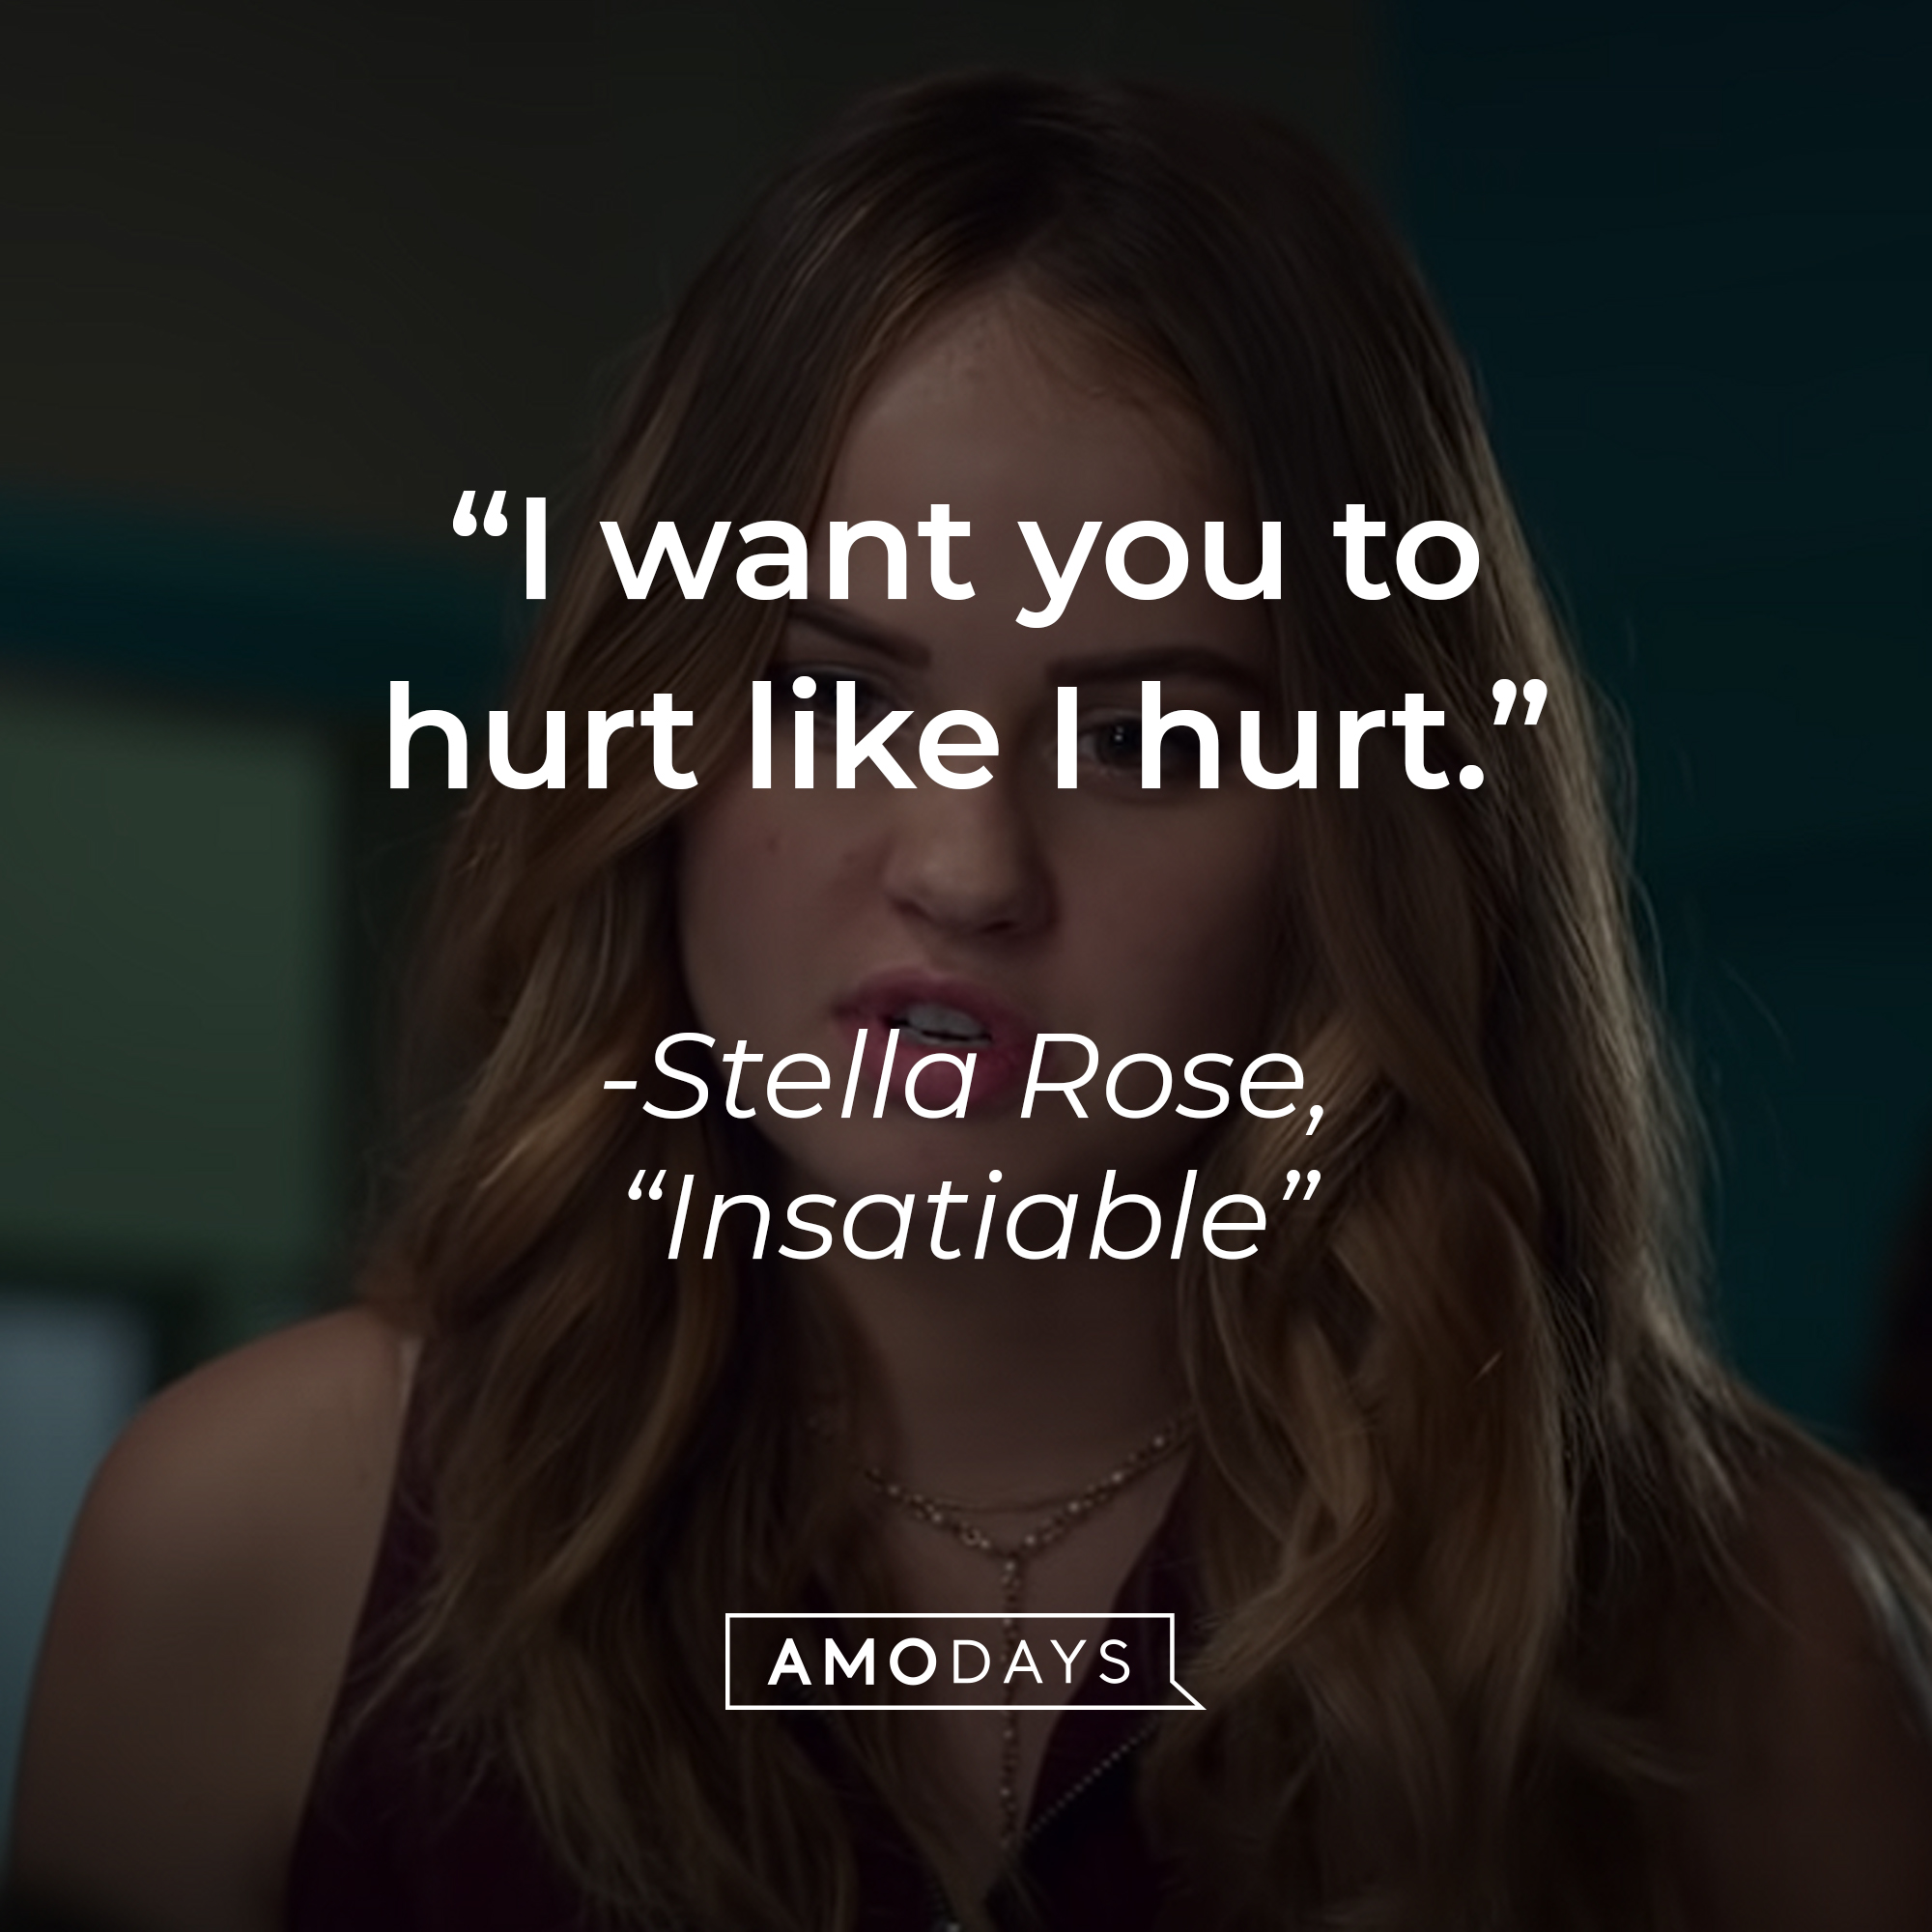 Patty Bladell with her quote on "Insatiable:" “I want you to hurt like I hurt." | Source: Youtube.com/Netflix